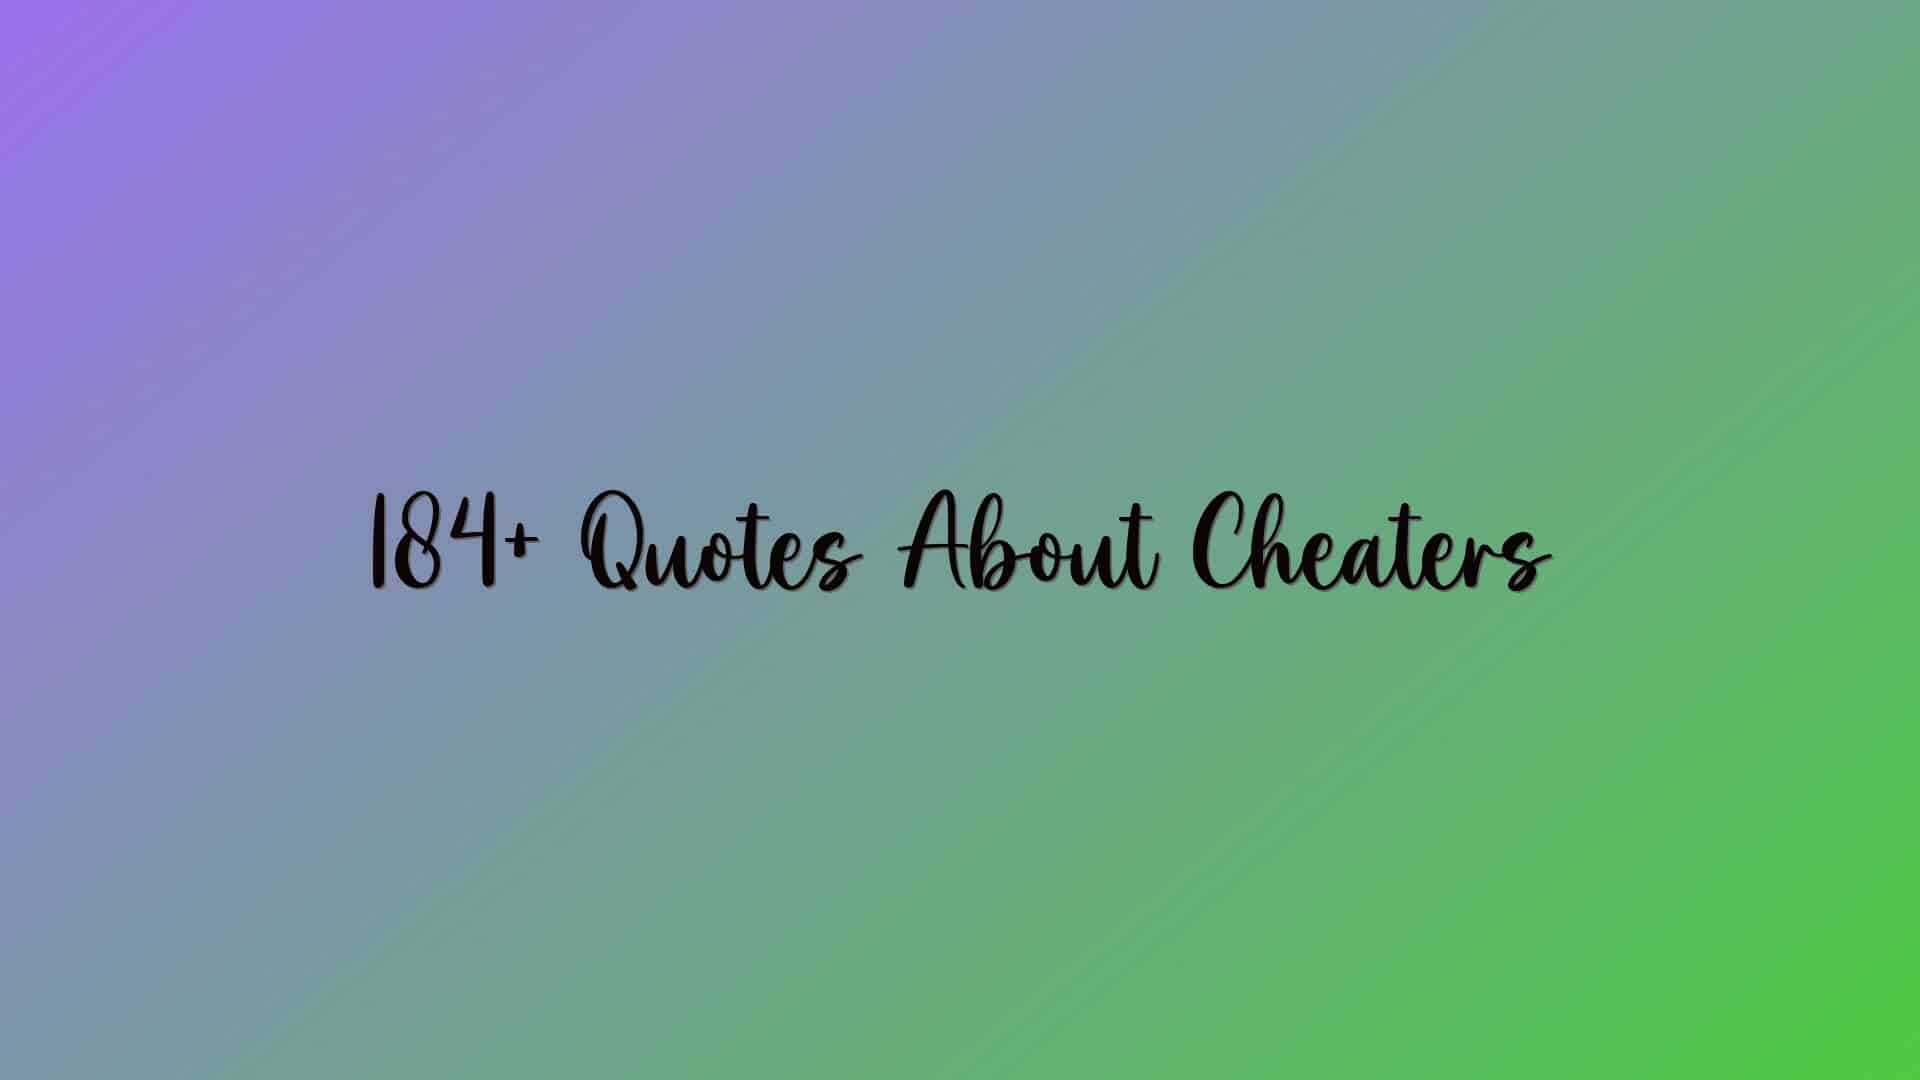 184+ Quotes About Cheaters